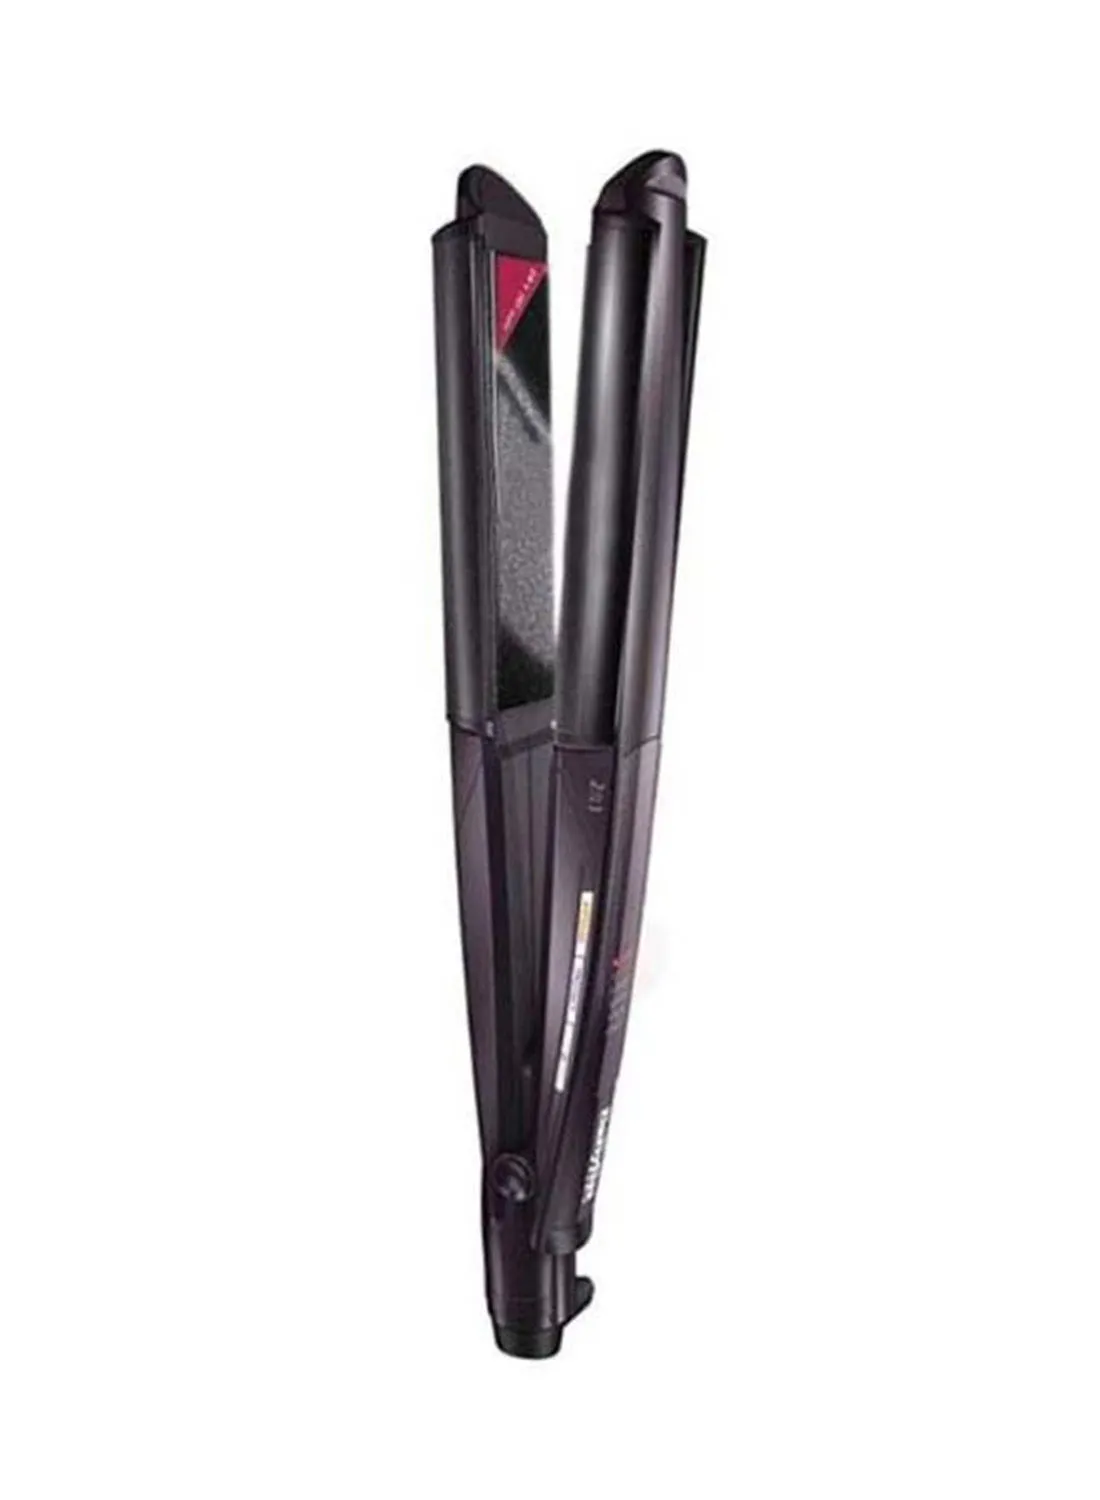 babyliss Hair Straightener Wet And Dry Straight - Dual-Function Straightening, Curling Advanced Heat Technology With Quick Heat-Up Time - Long-Lasting Results, Salon-Quality Styling - ST330SDE Black